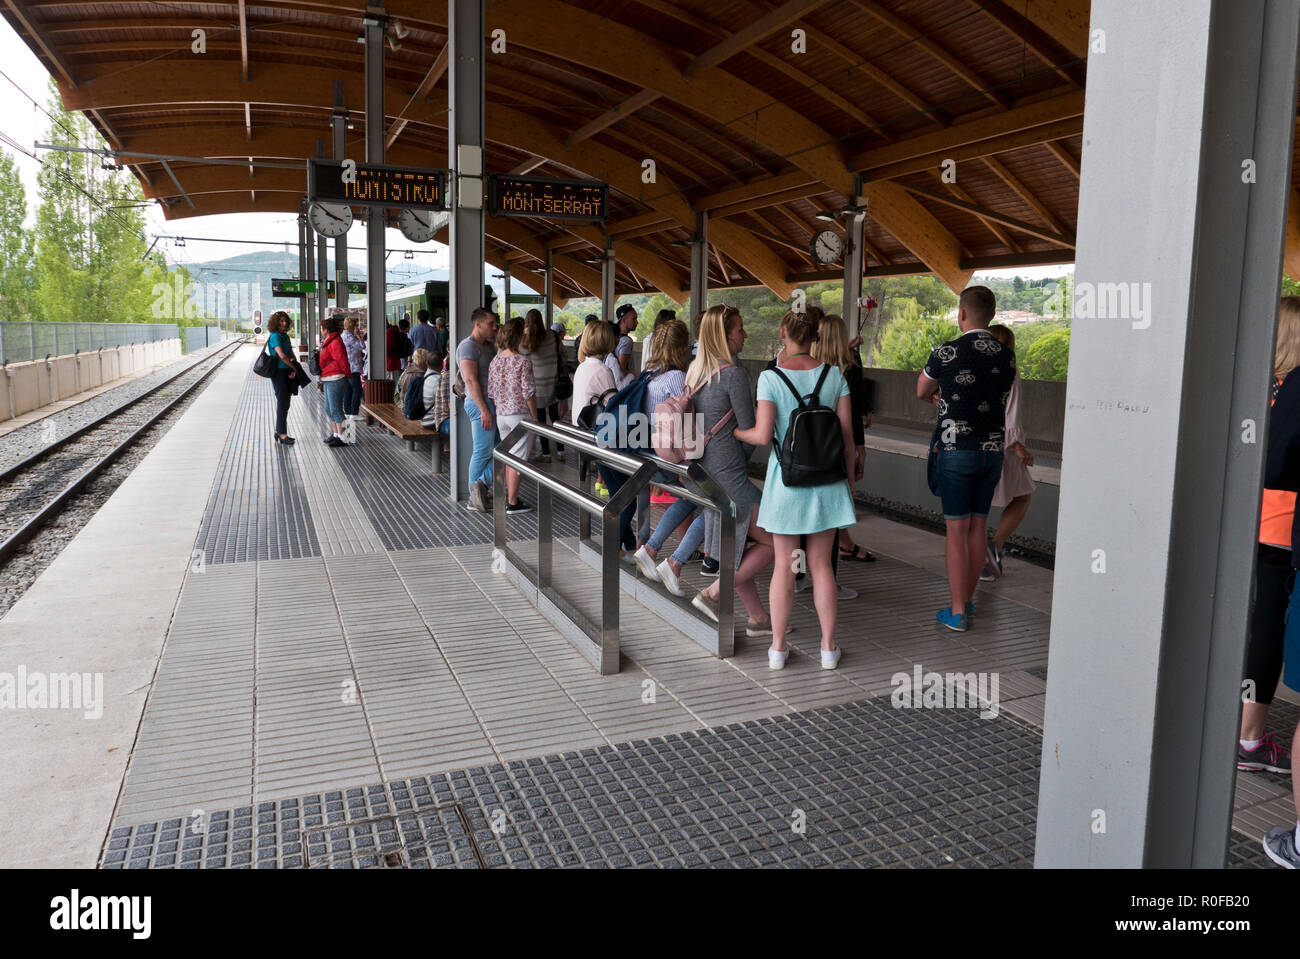 Tourists waiting on the platform for the arrival of the funicular train at Monserrat , Barcelona, Spain Stock Photo